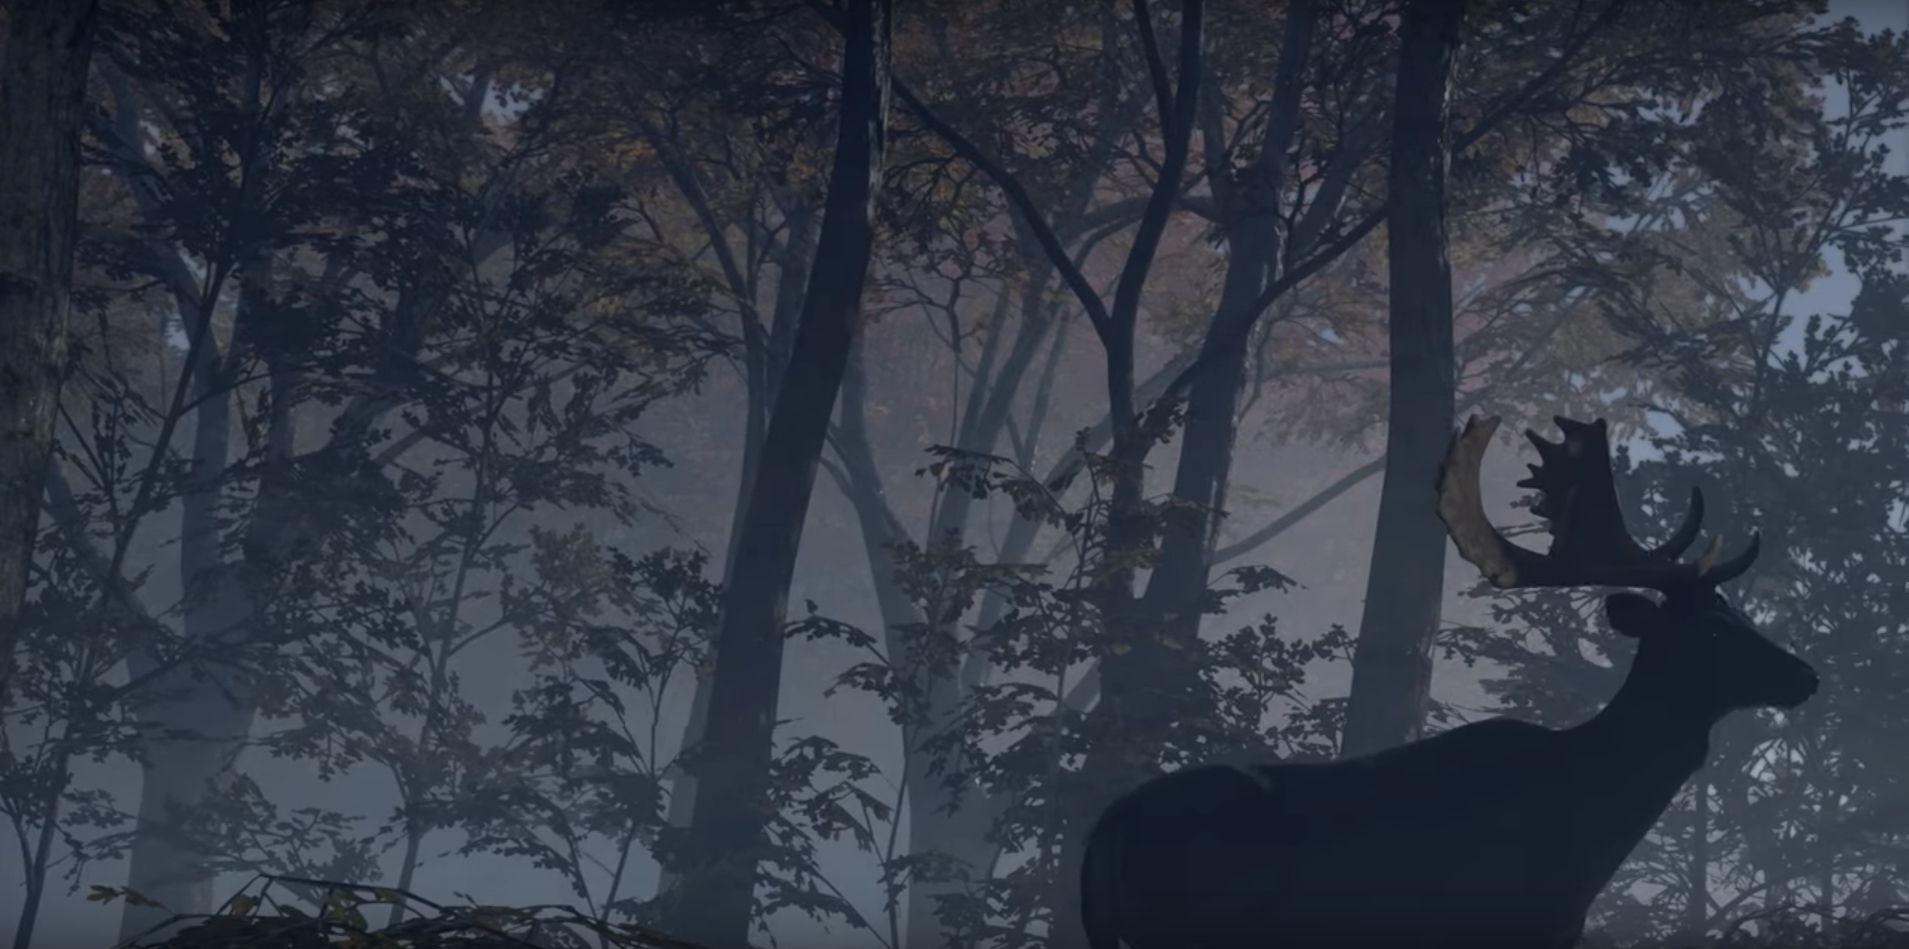 TheHunter: Call Of The Wild Receives The New Smoking Barrels Weapons Pack DLC